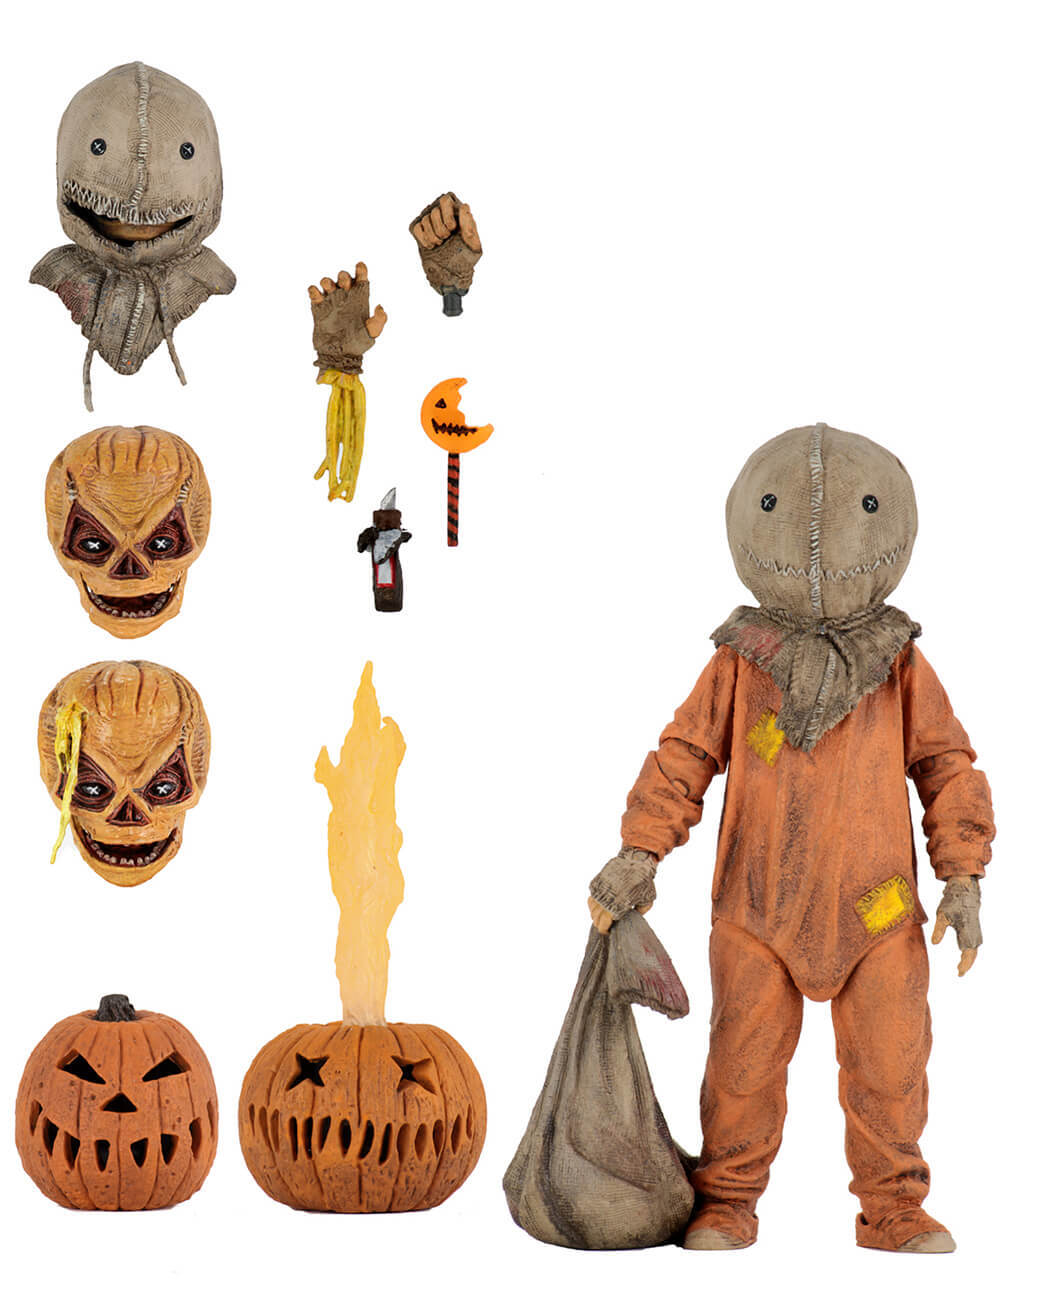 This is a Trick R Treat Sam NECA 7" ultimate action figure with 3 heads, 2 pumpkins, 2 hands, knife and bitten lollipop.